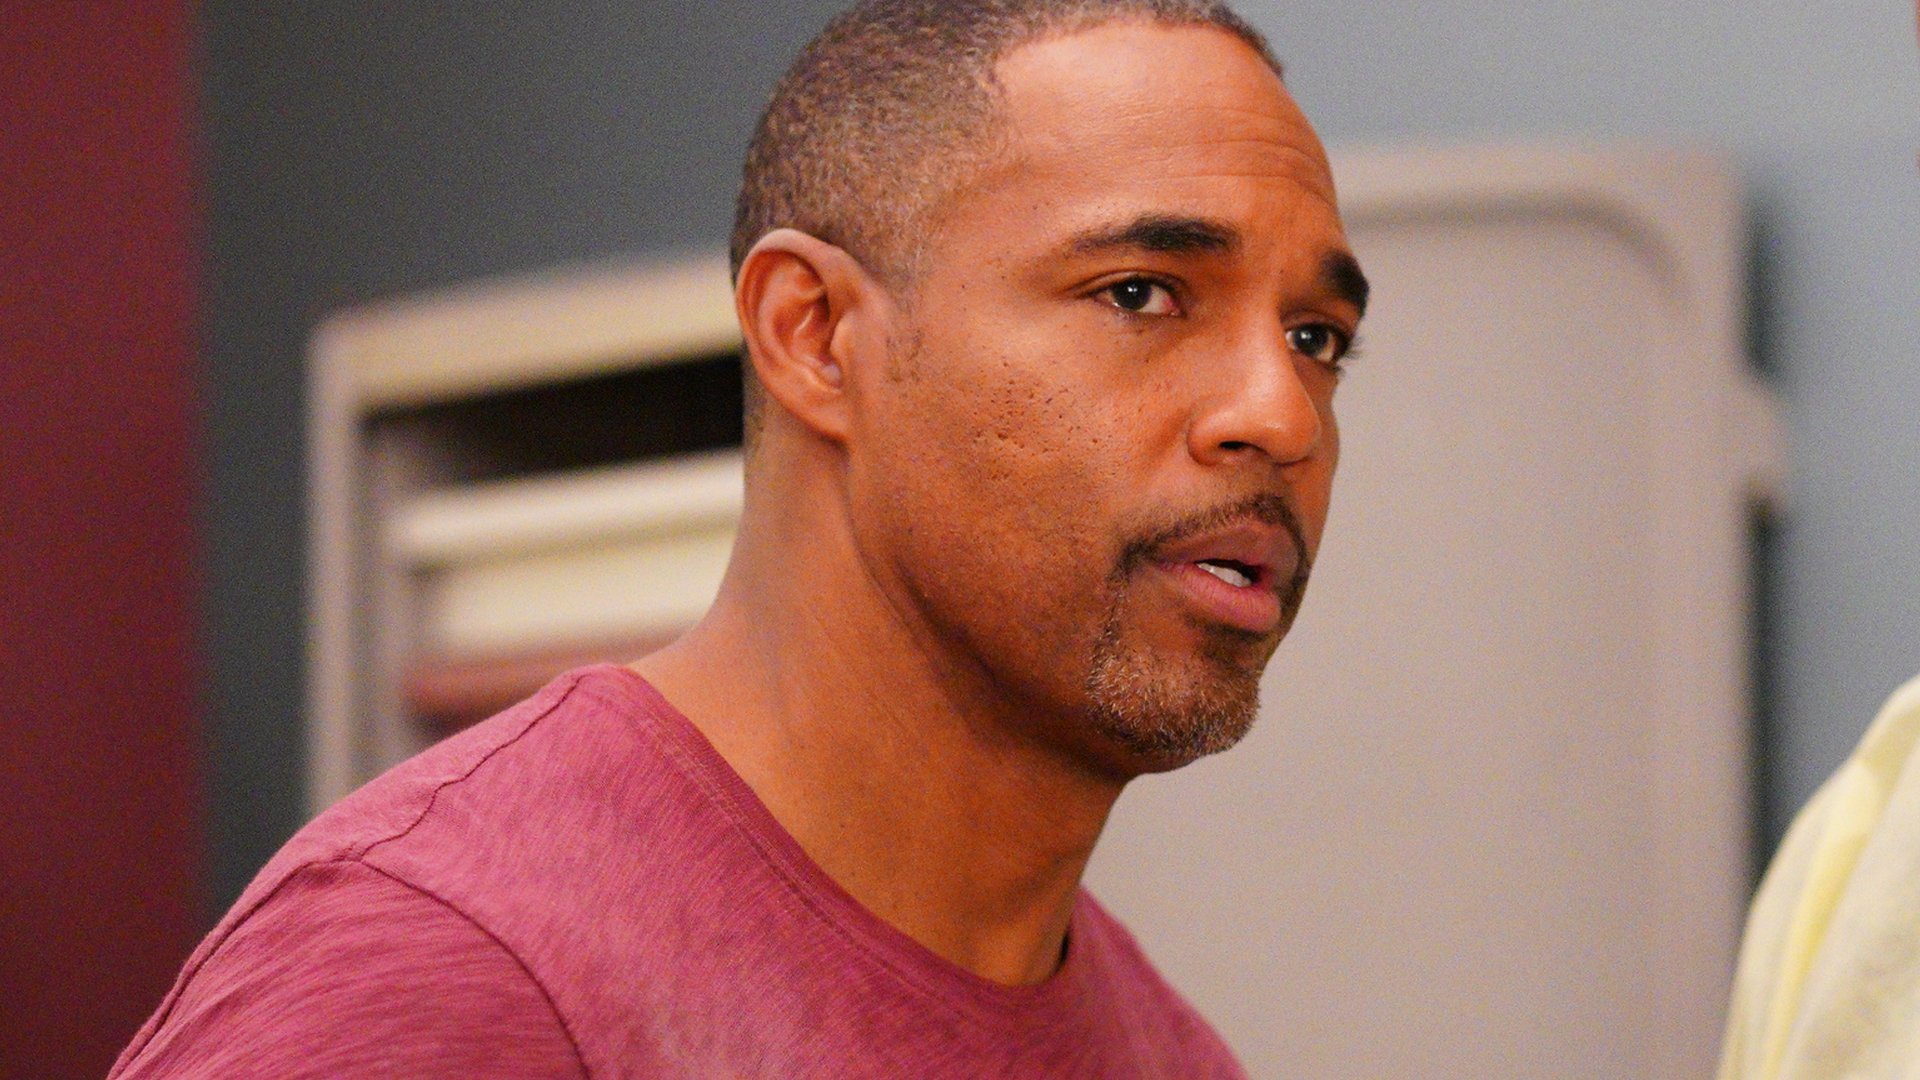 Jason George as Ben Warren looking surprised at Grey Sloan Memorial in the ‘Grey’s Anatomy’ and ‘Station 19’ crossover from January 2020